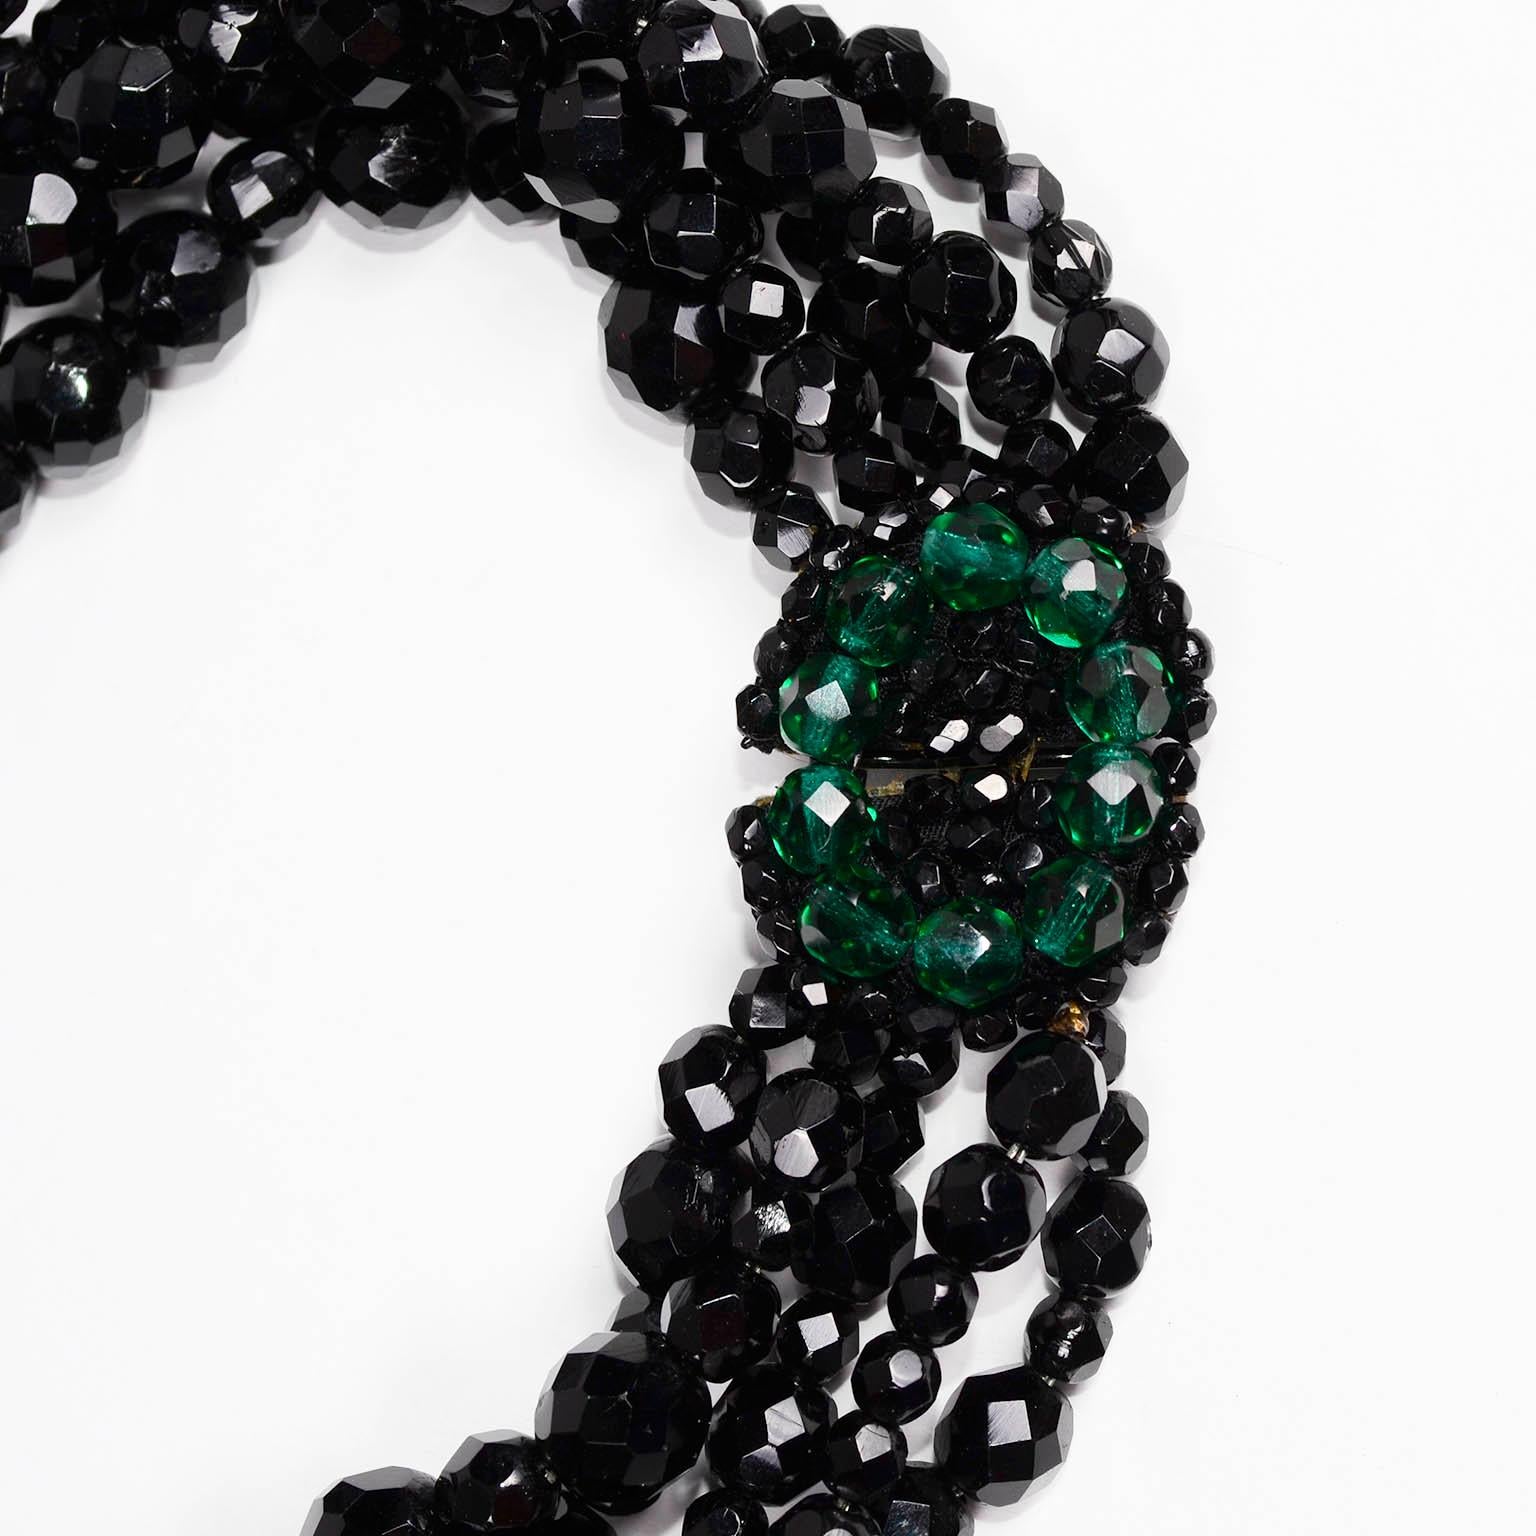 Erare 1980s Emanuel Ungaro Couture Black & Green Choker Mughal Inspired Necklace 3